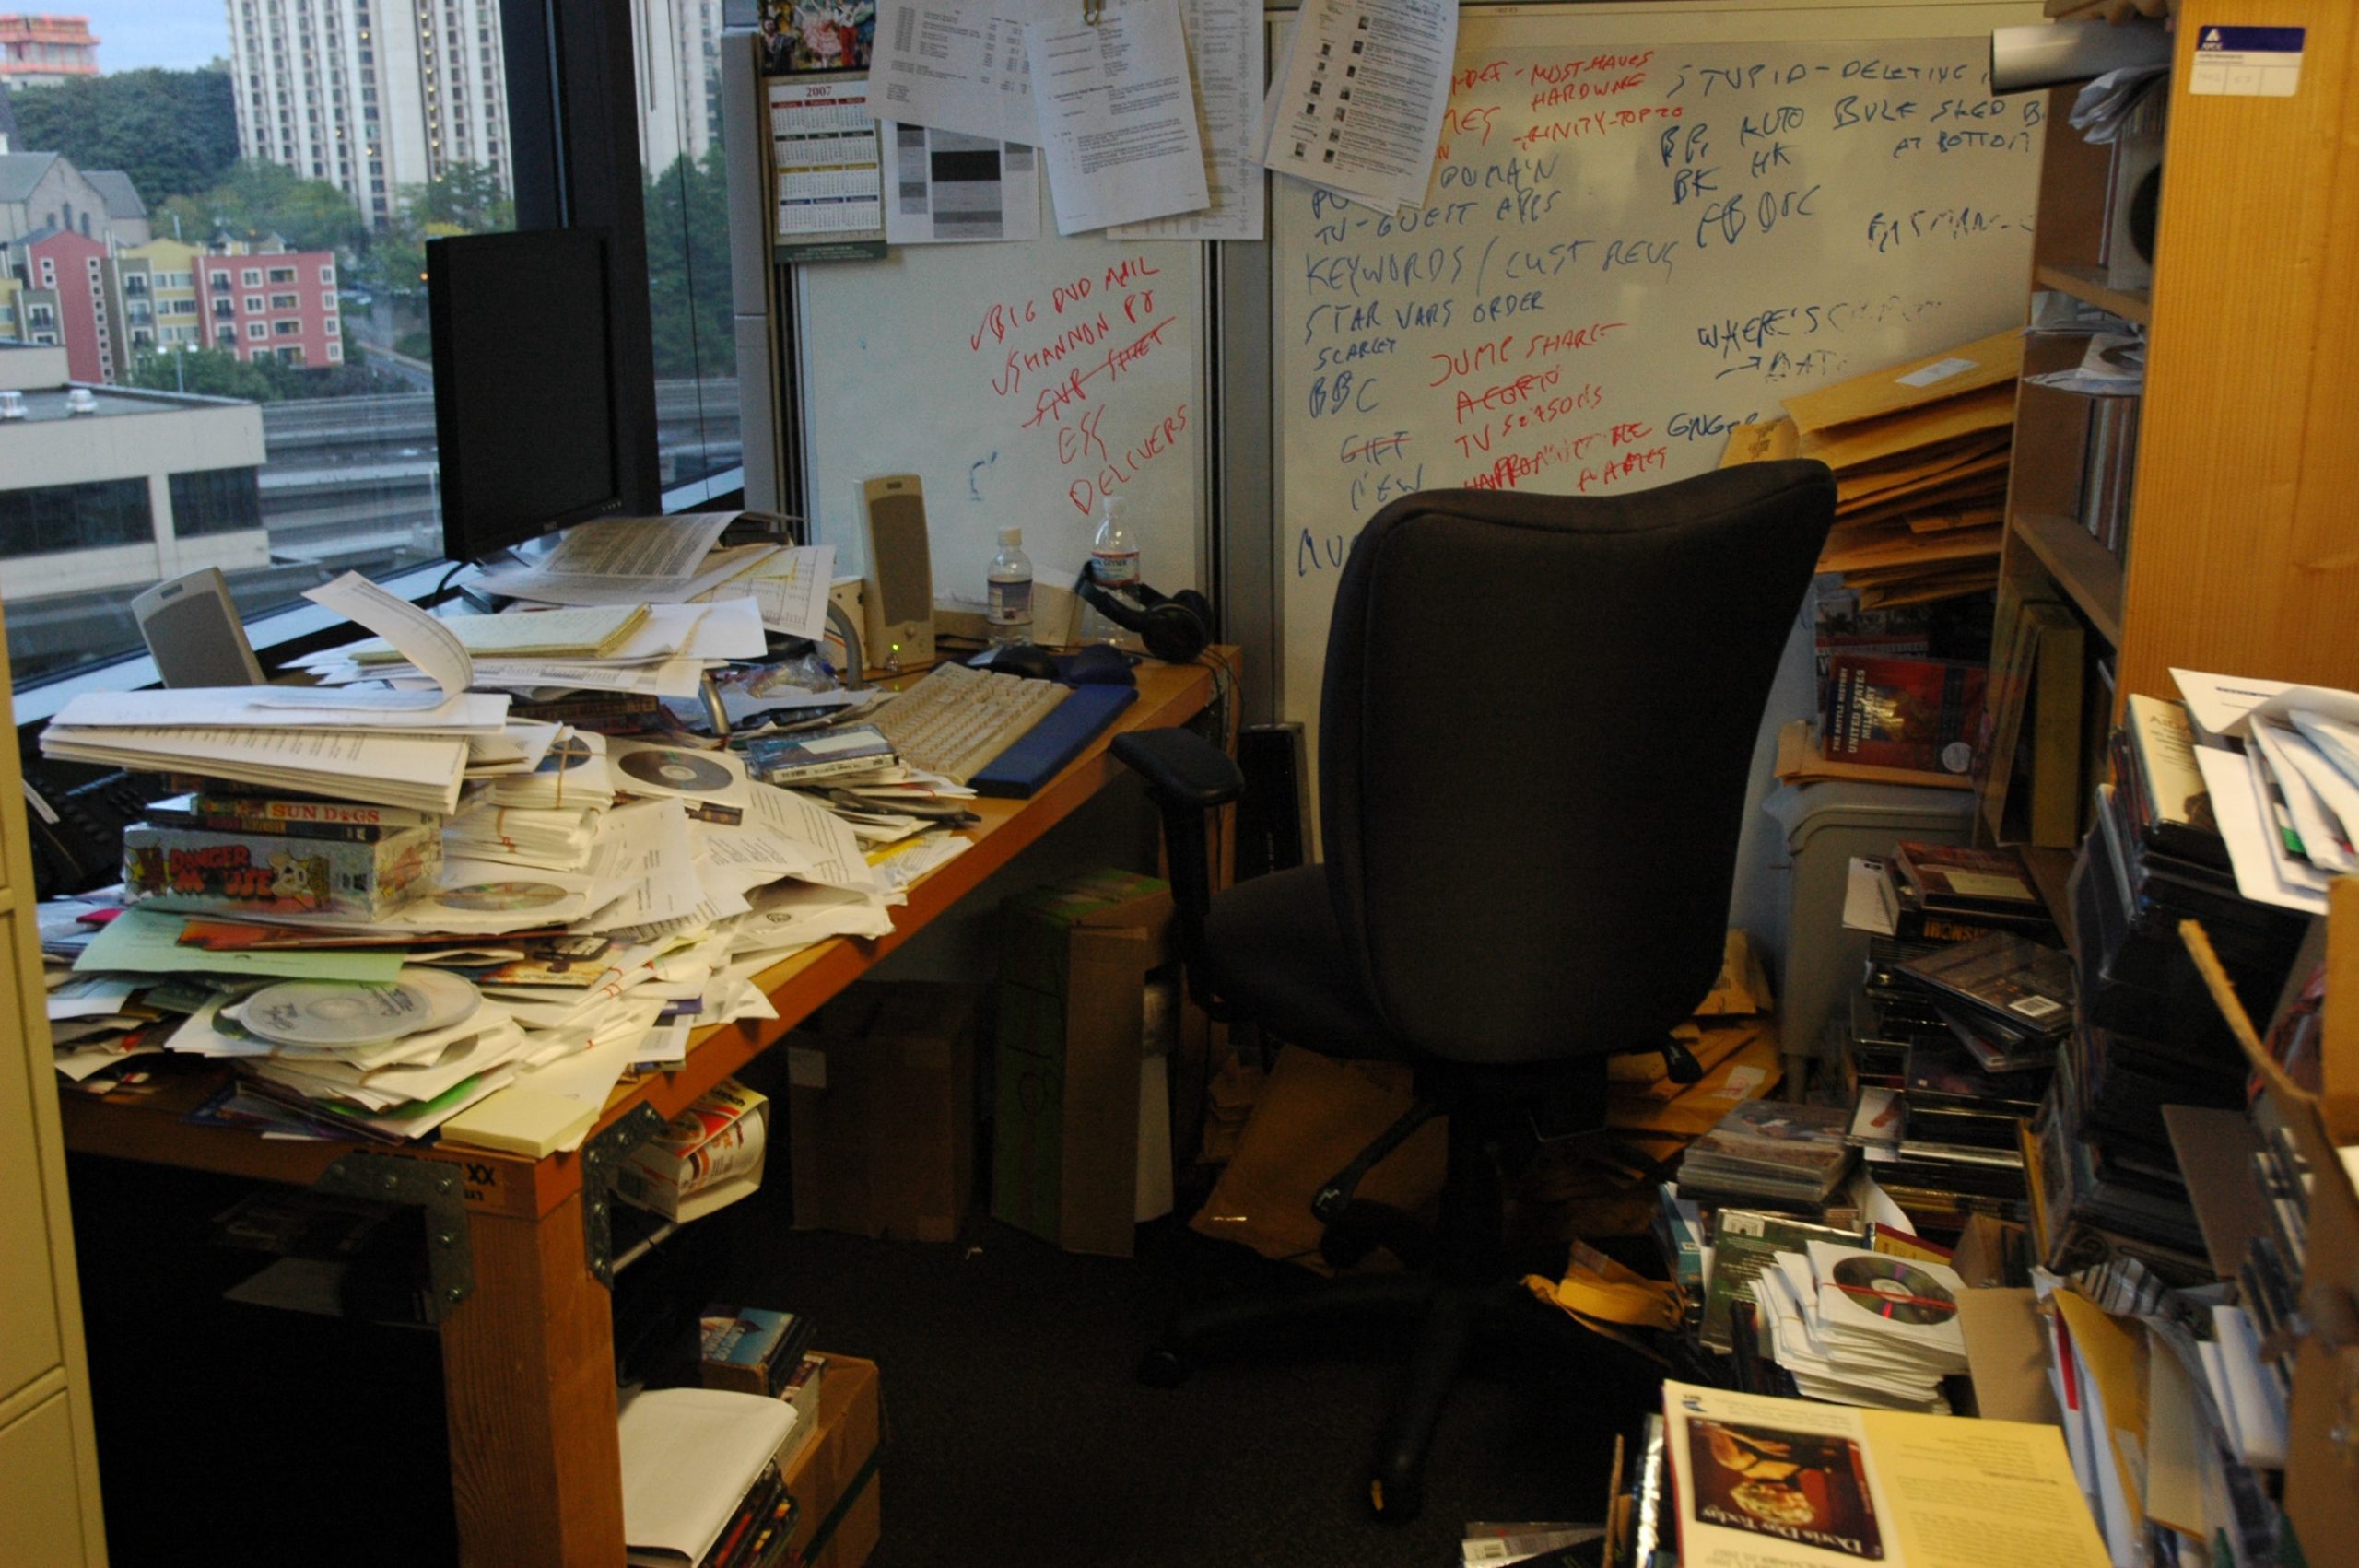 A desk and a chair in an office, with disorganized piles of papers everywhere.